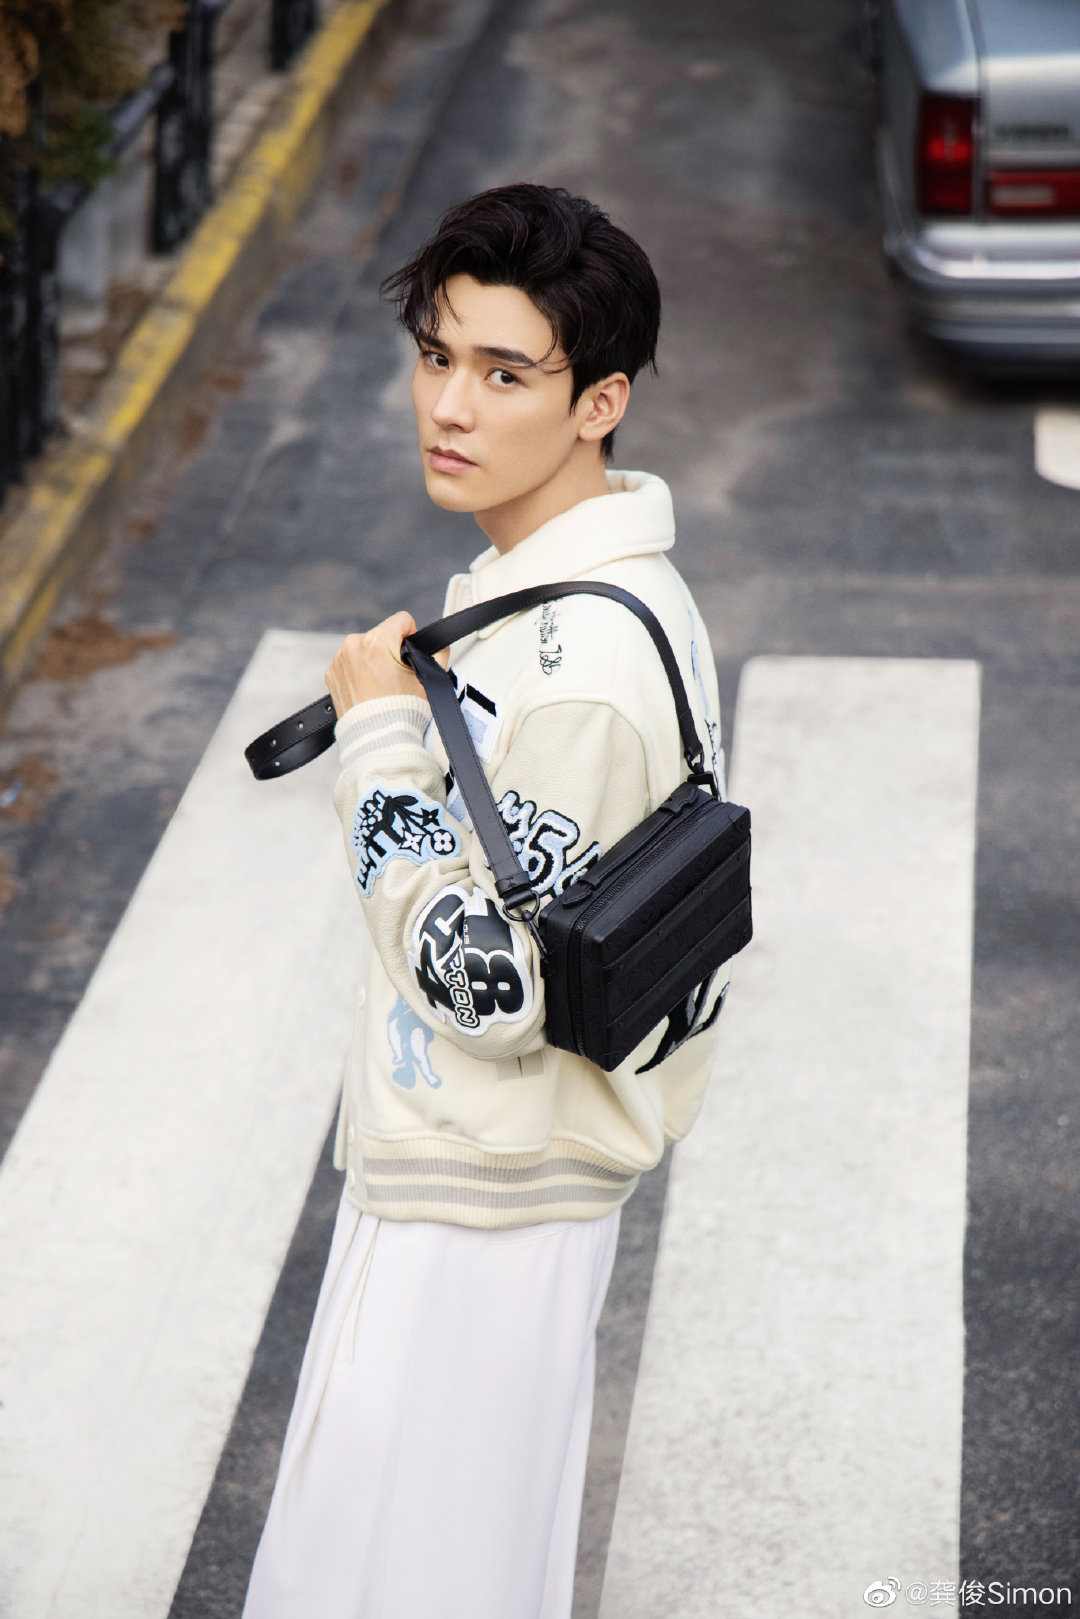 Gong Jun 龚俊 💙 on X: 220817  Gong Jun Weibo Update Caption: Slightly  showing off my outfit: Feel the delicate texture of Louis Vuitton Soft Trunk  bag, unleash my personality at